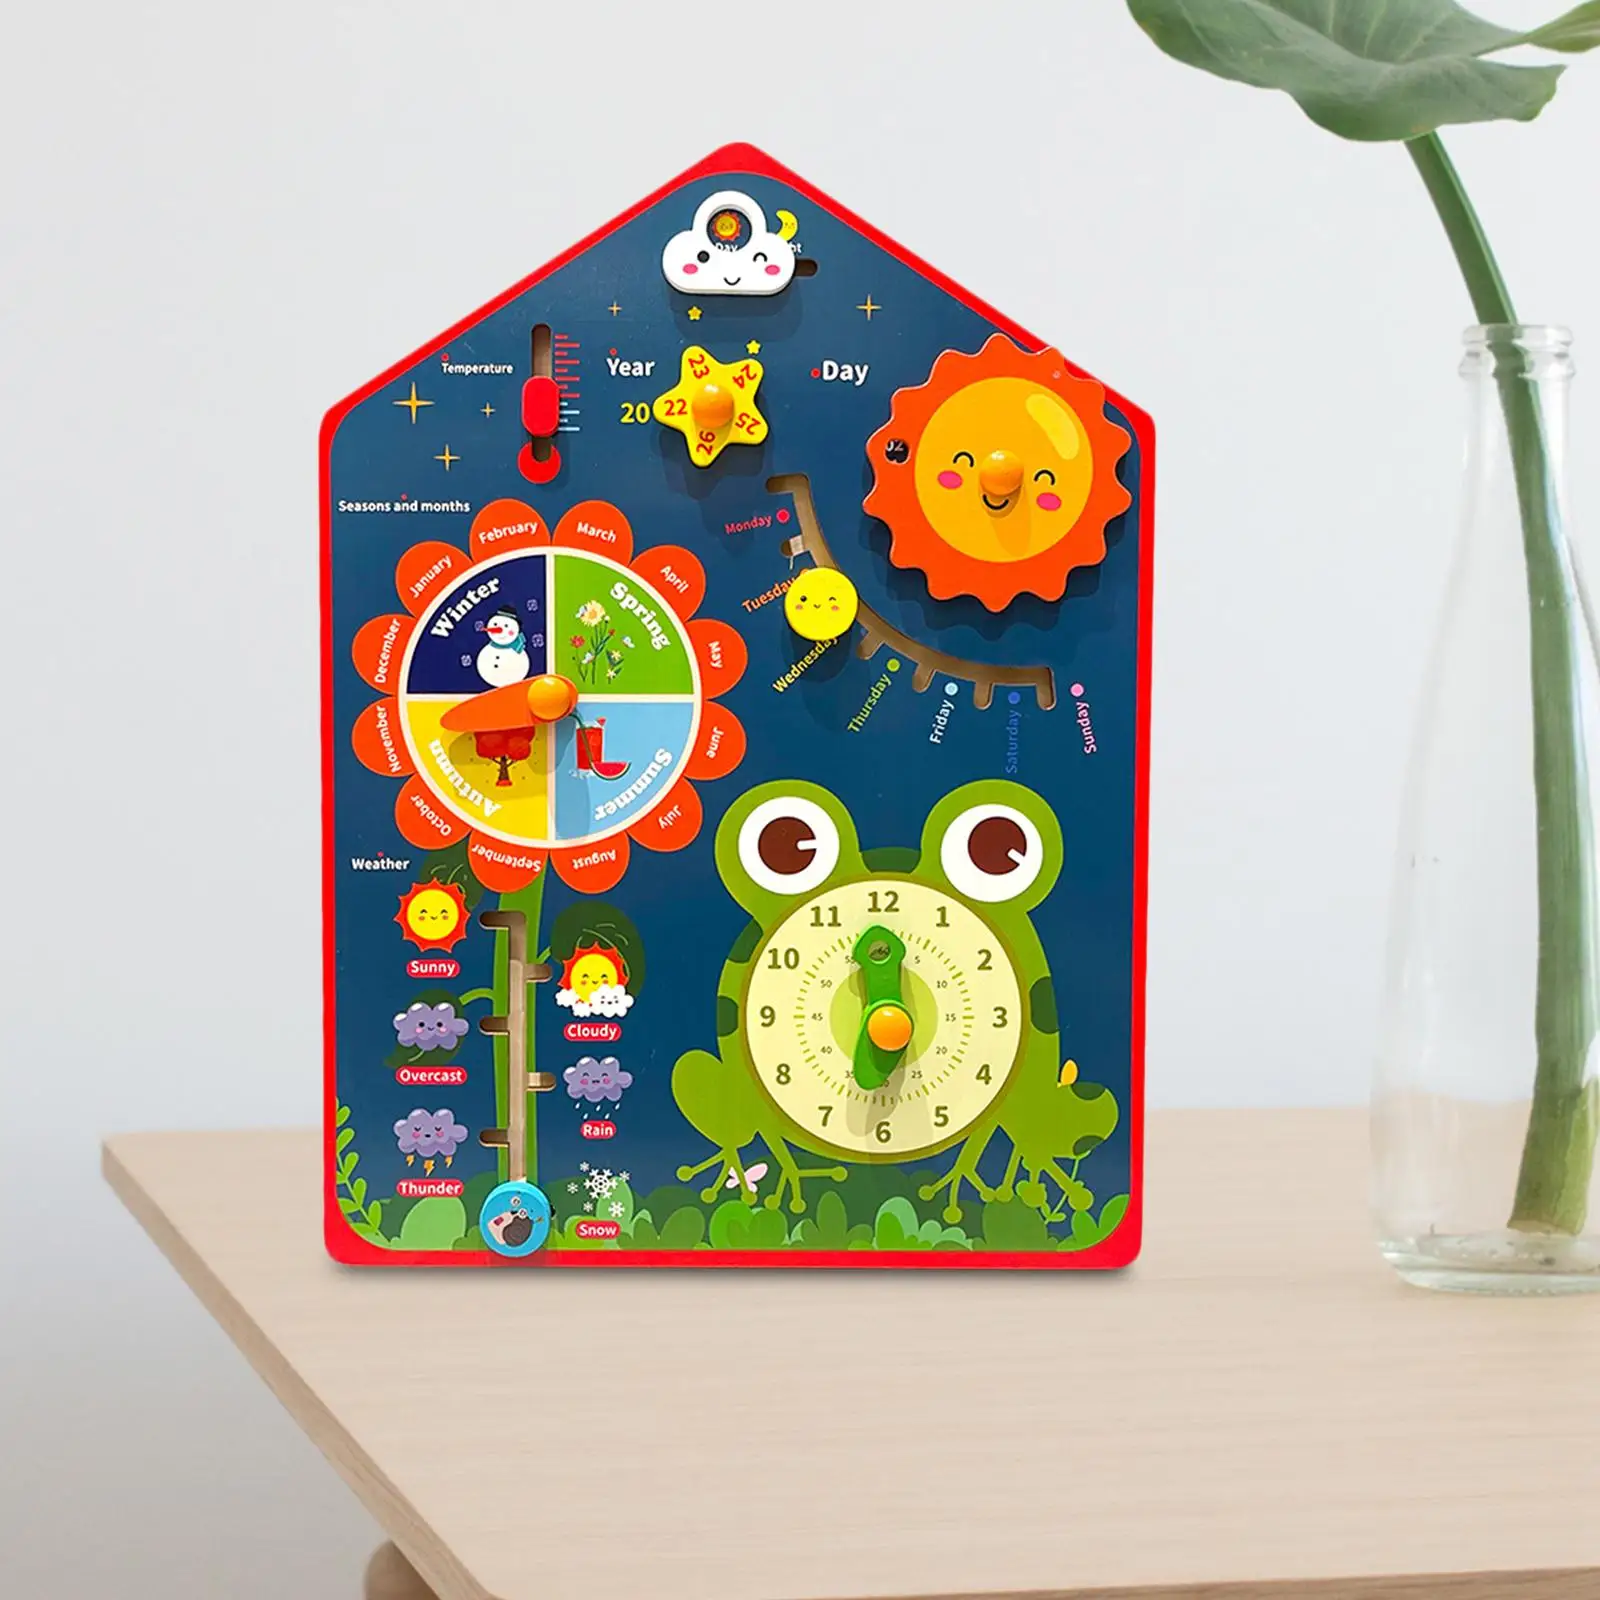 Wooden Calendar Clock Teaching Aids Early Learning Educational Toy Cognitive Puzzles for Children Girls Kids Boy Birthday Gifts